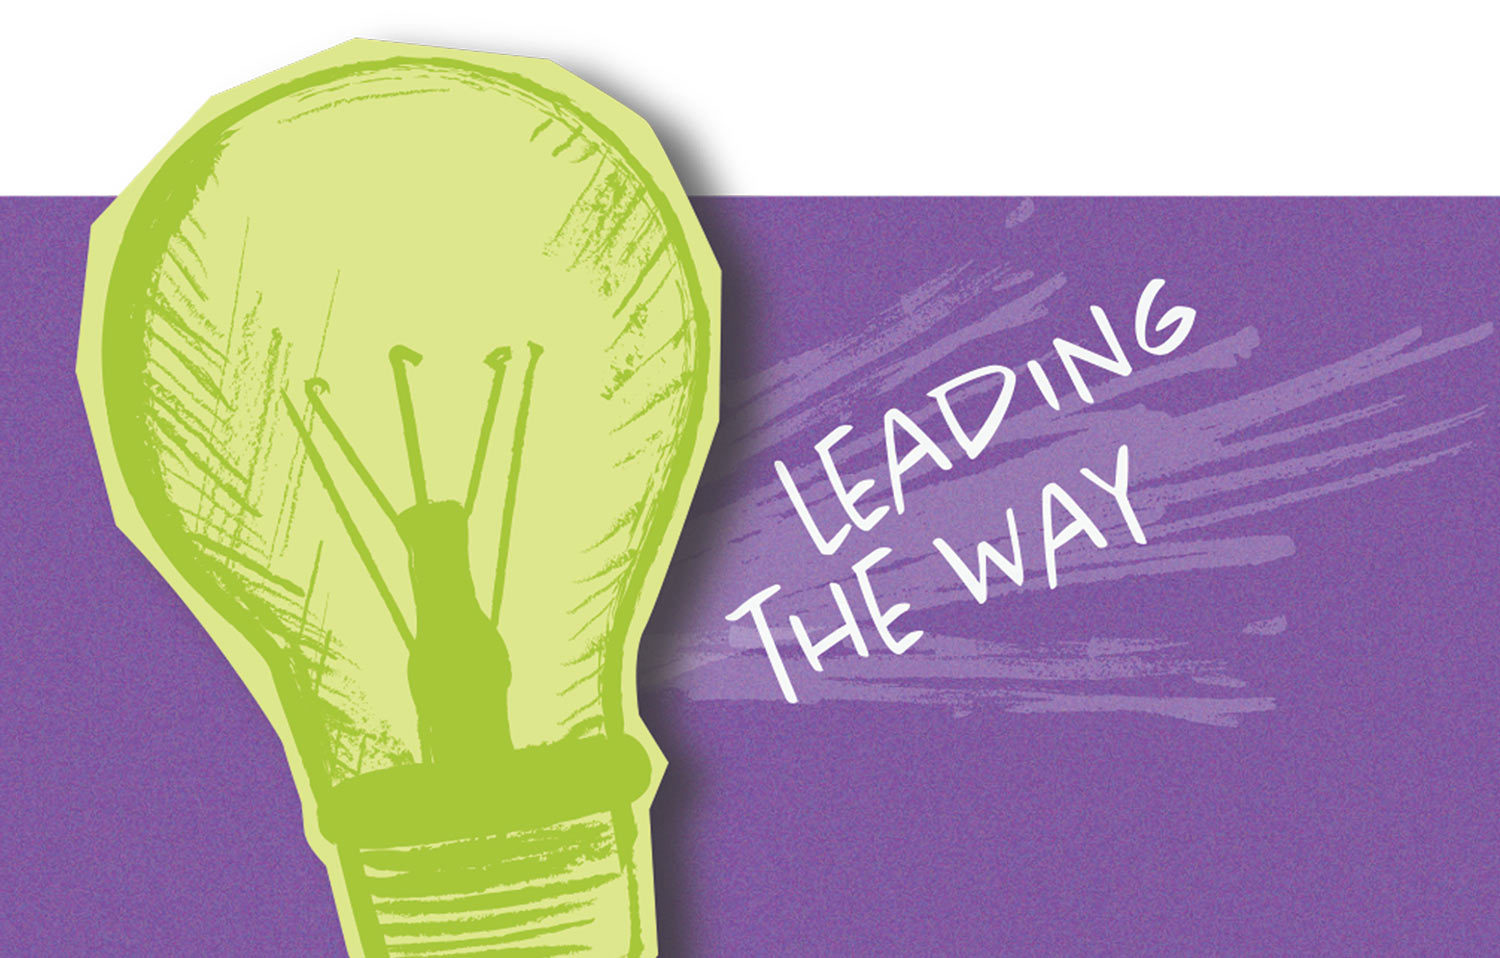 green lightbulb illustration against a purple background with words reading "Leading the Way